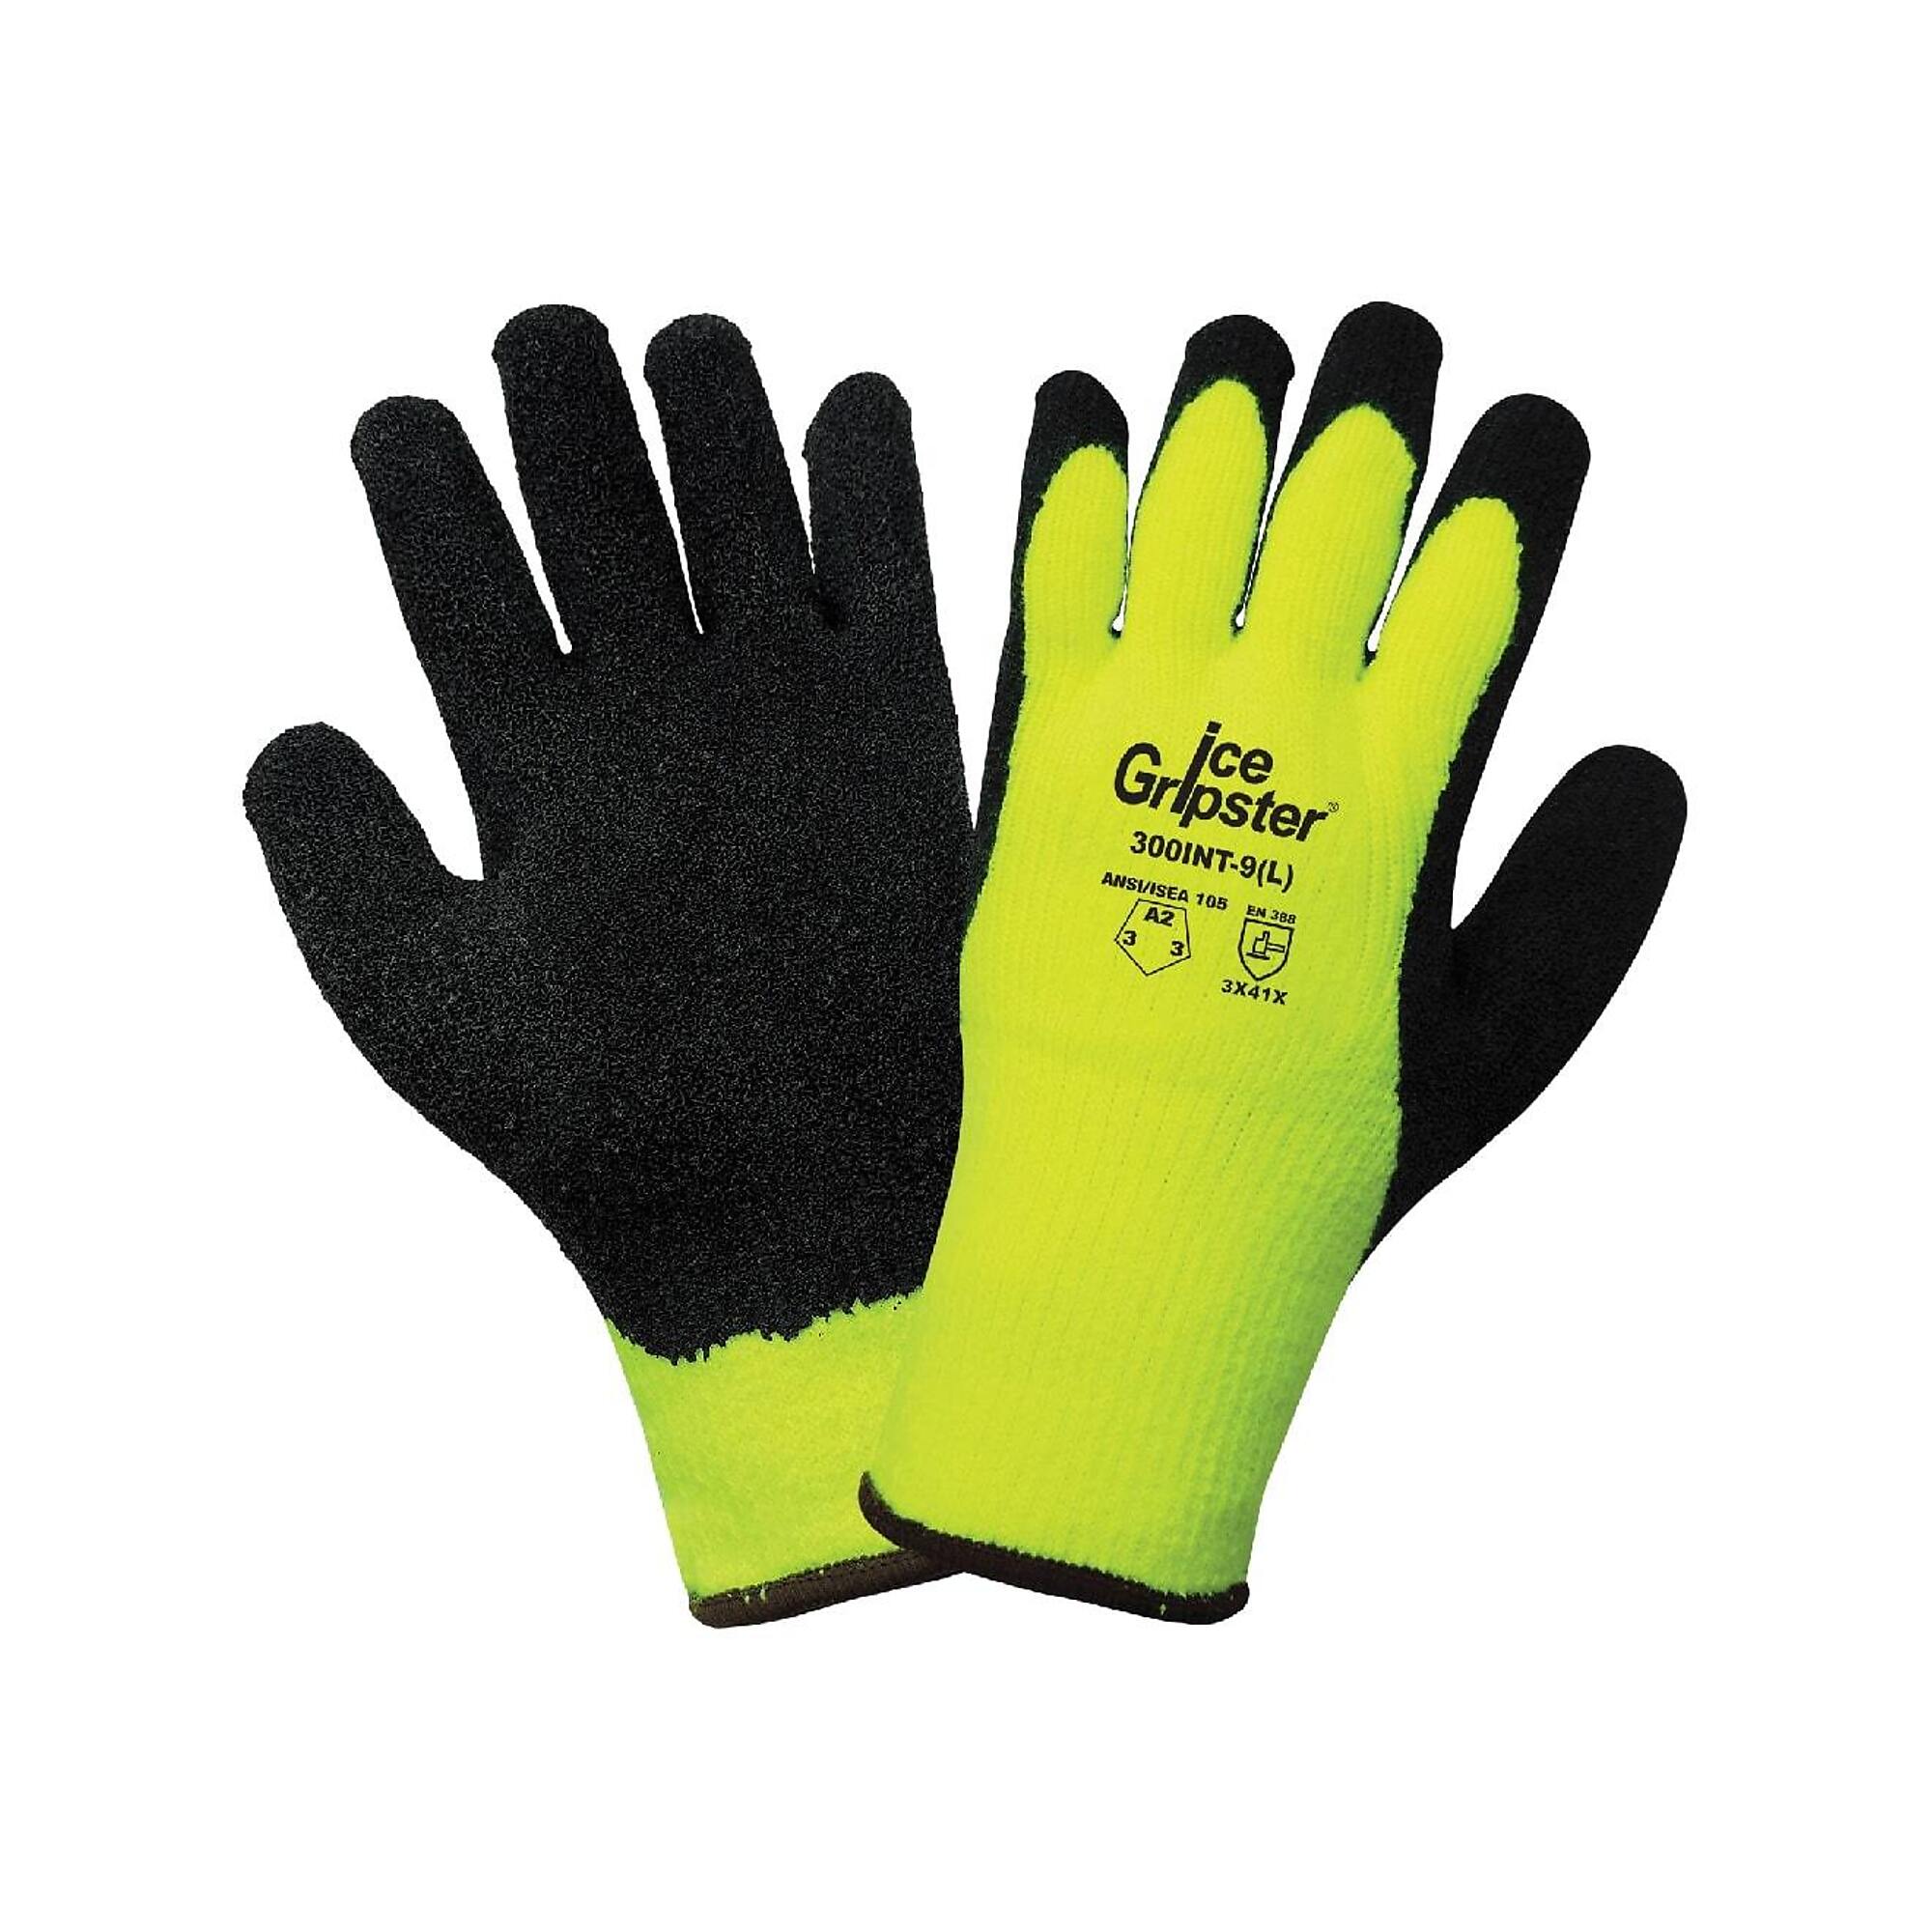 Global Glove Ice Gripster , HV Insulated, Wat-Resist, Rub Dip, Cut A2 Gloves - 12 Pairs, Size 2XL, Color High-Visibility Yellow/Black, Included (qty.)